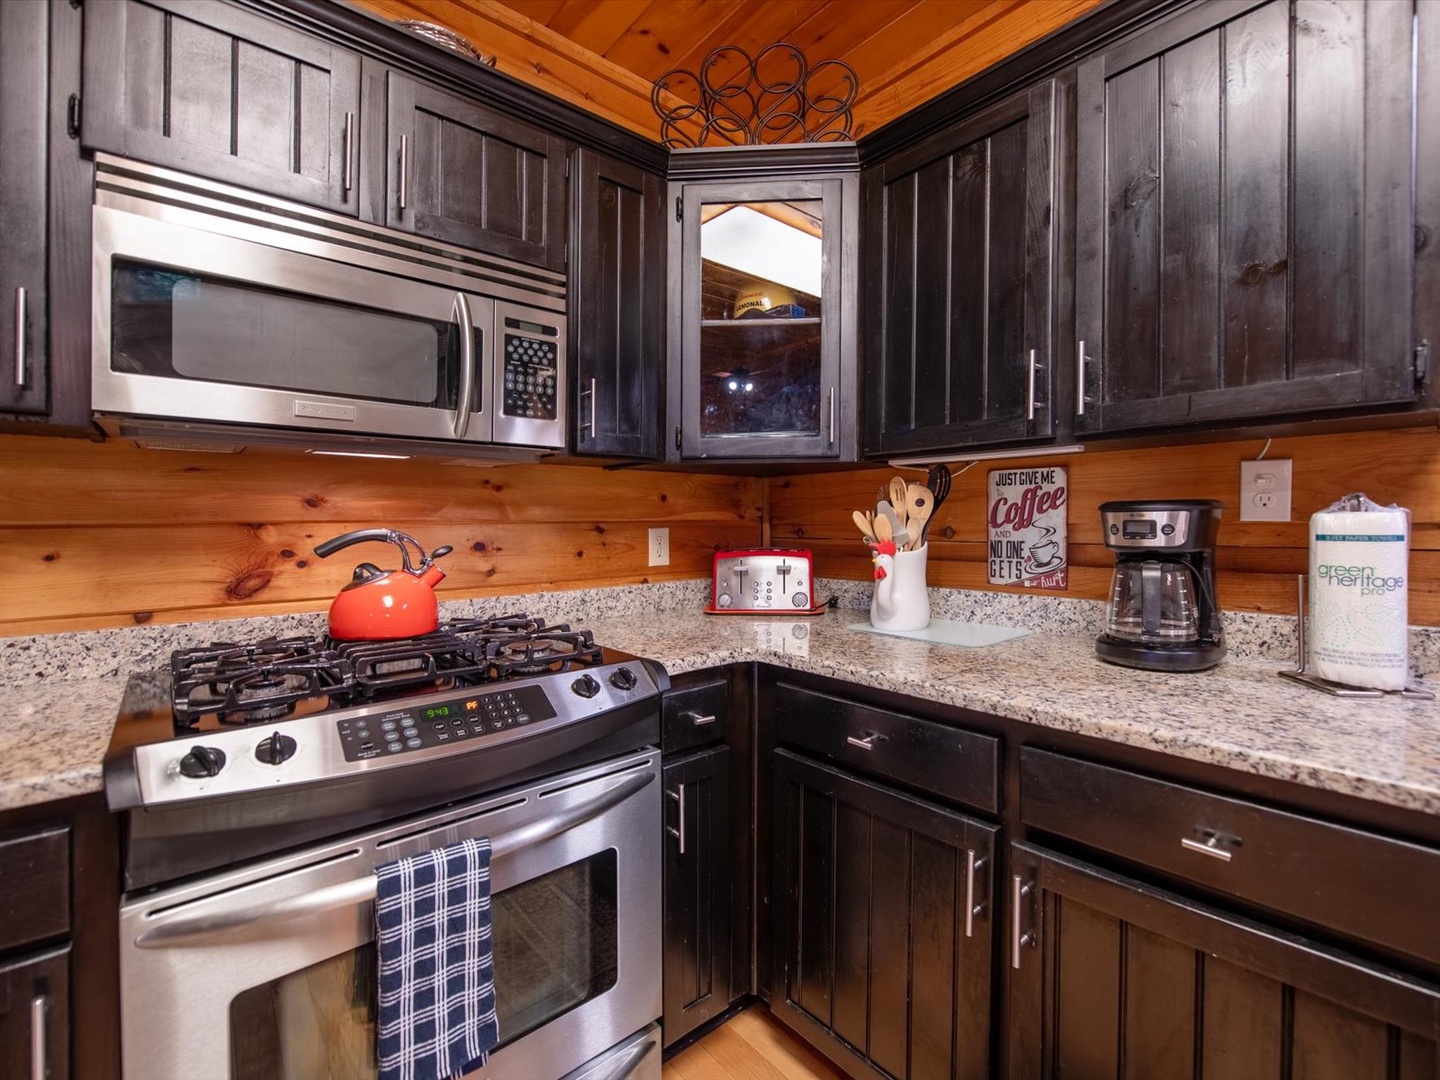 Aska Bliss- Stovetop and microwave in the kitchen with decor